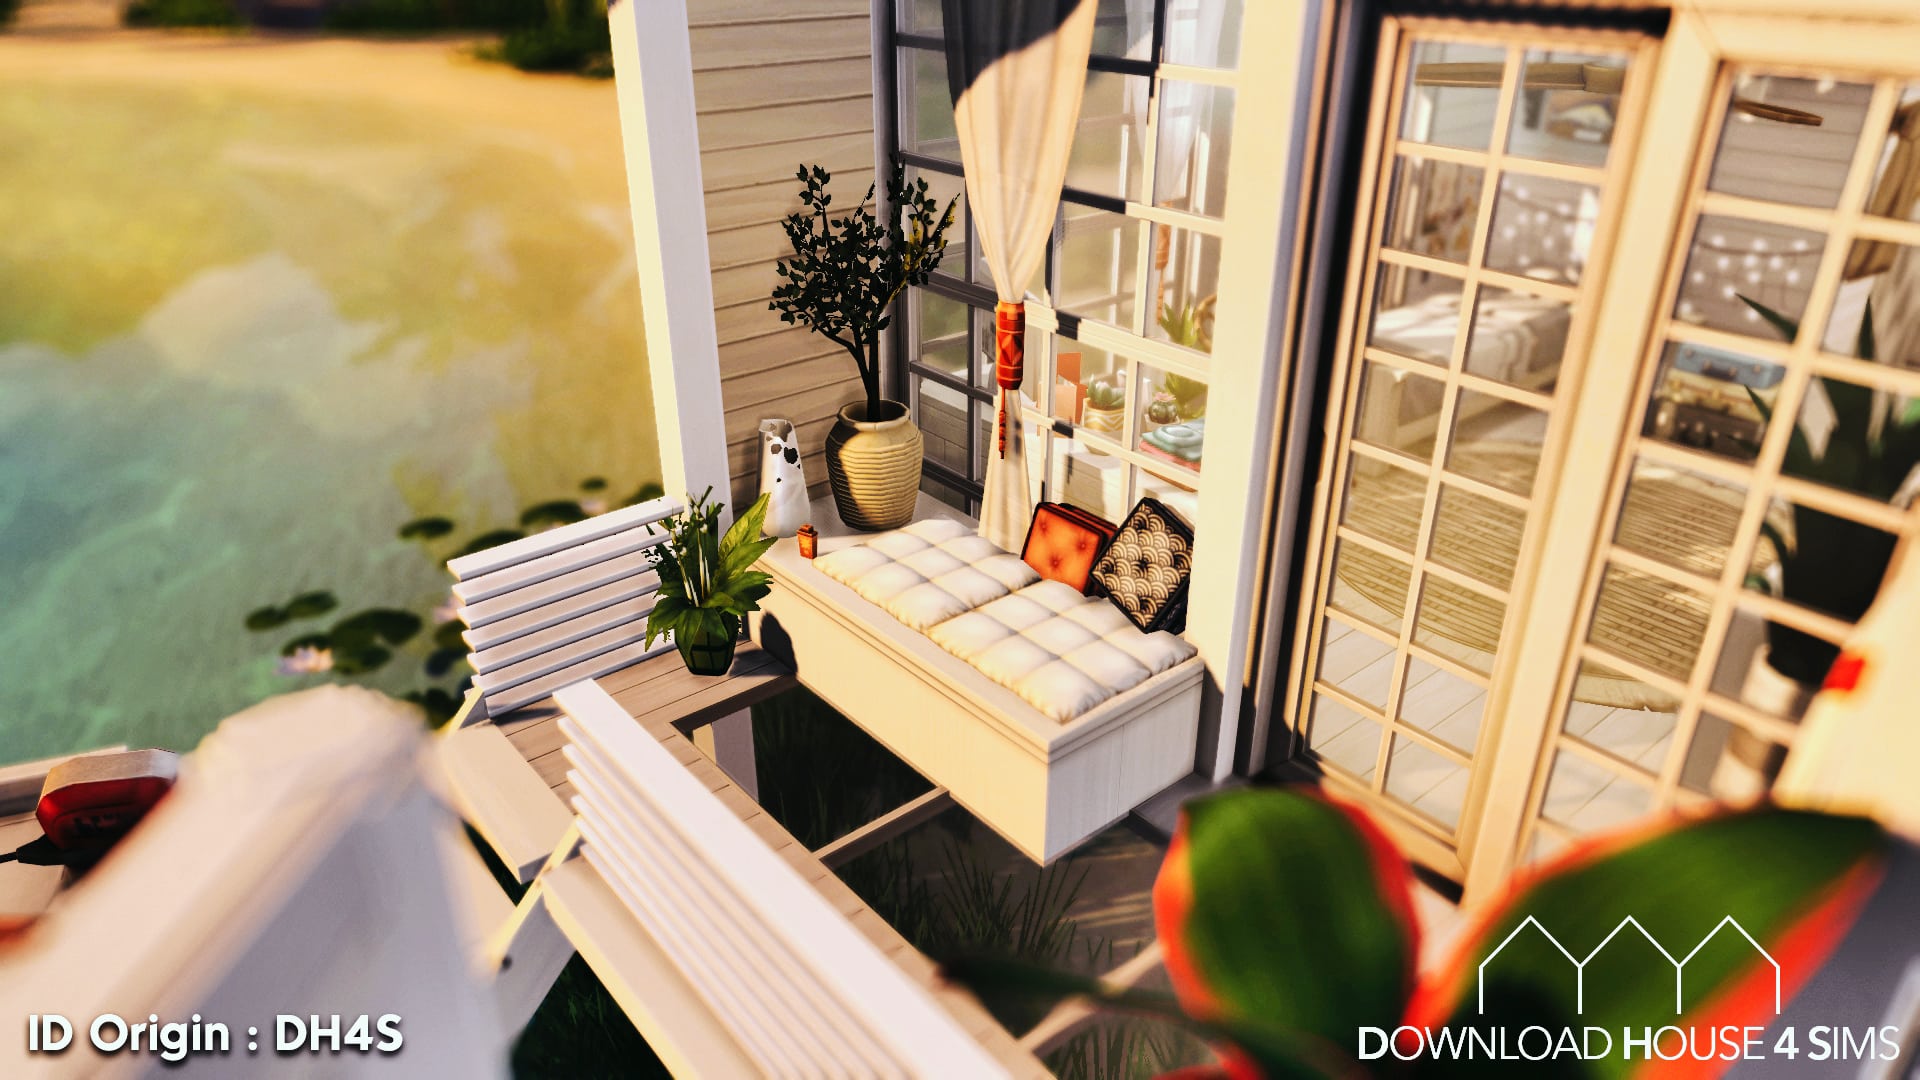 Download-House-4-sims-Tiny-beach-cabin-house-4